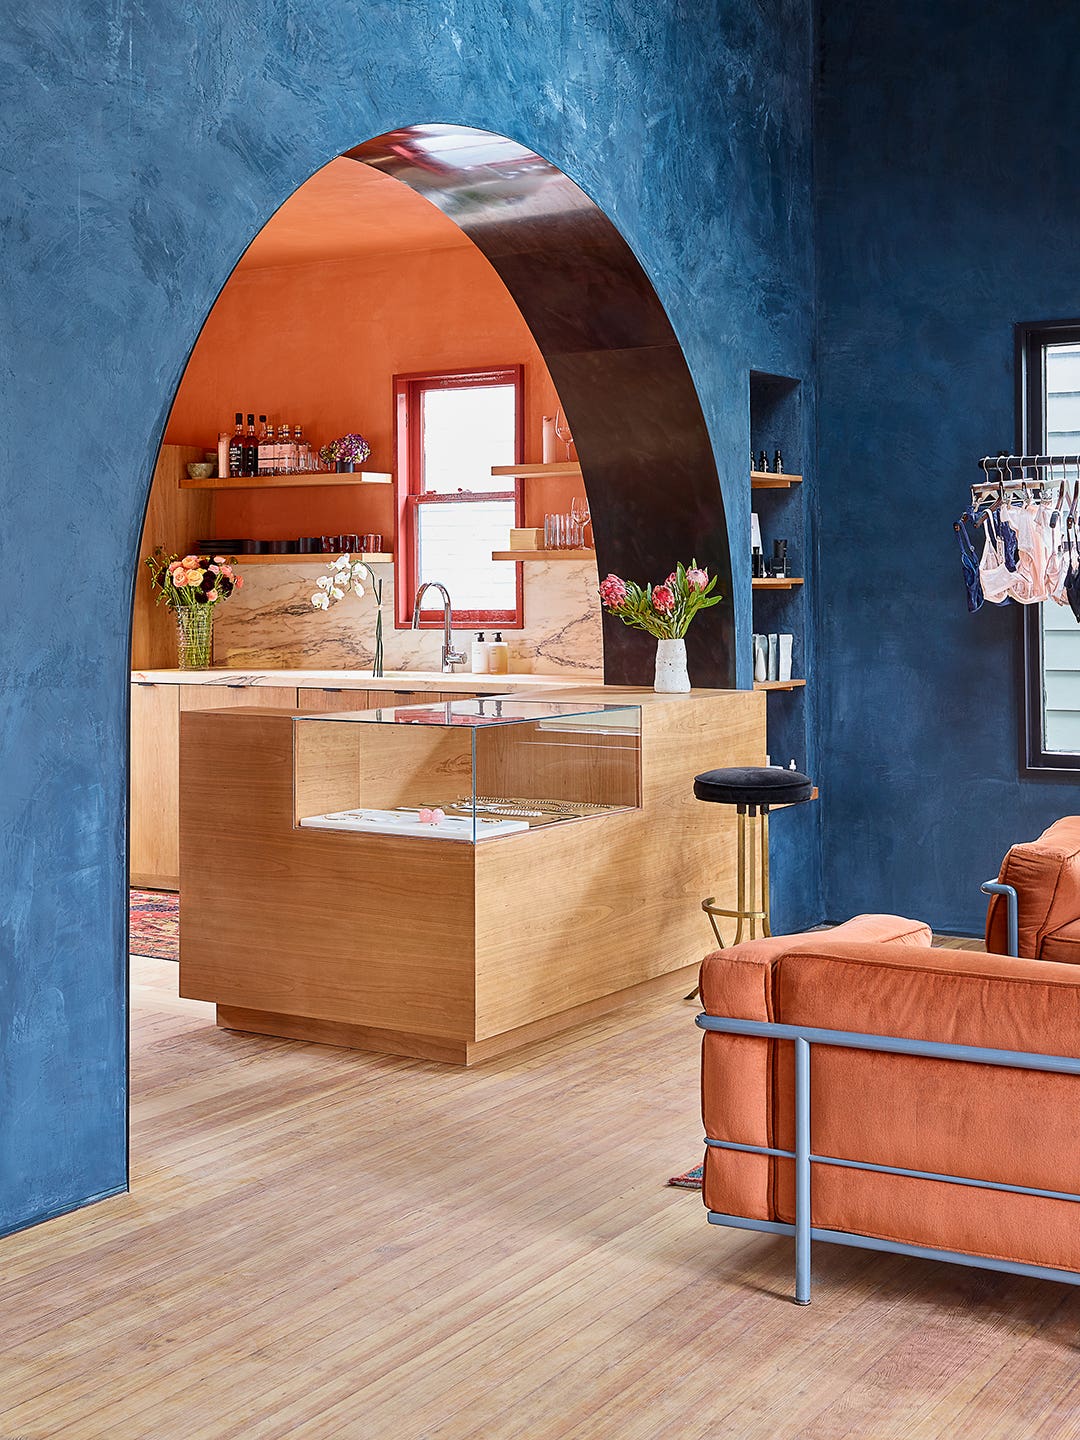 We’re Stealing This Fresh Take on Built-Ins From Austin’s New Sexual Wellness Shop